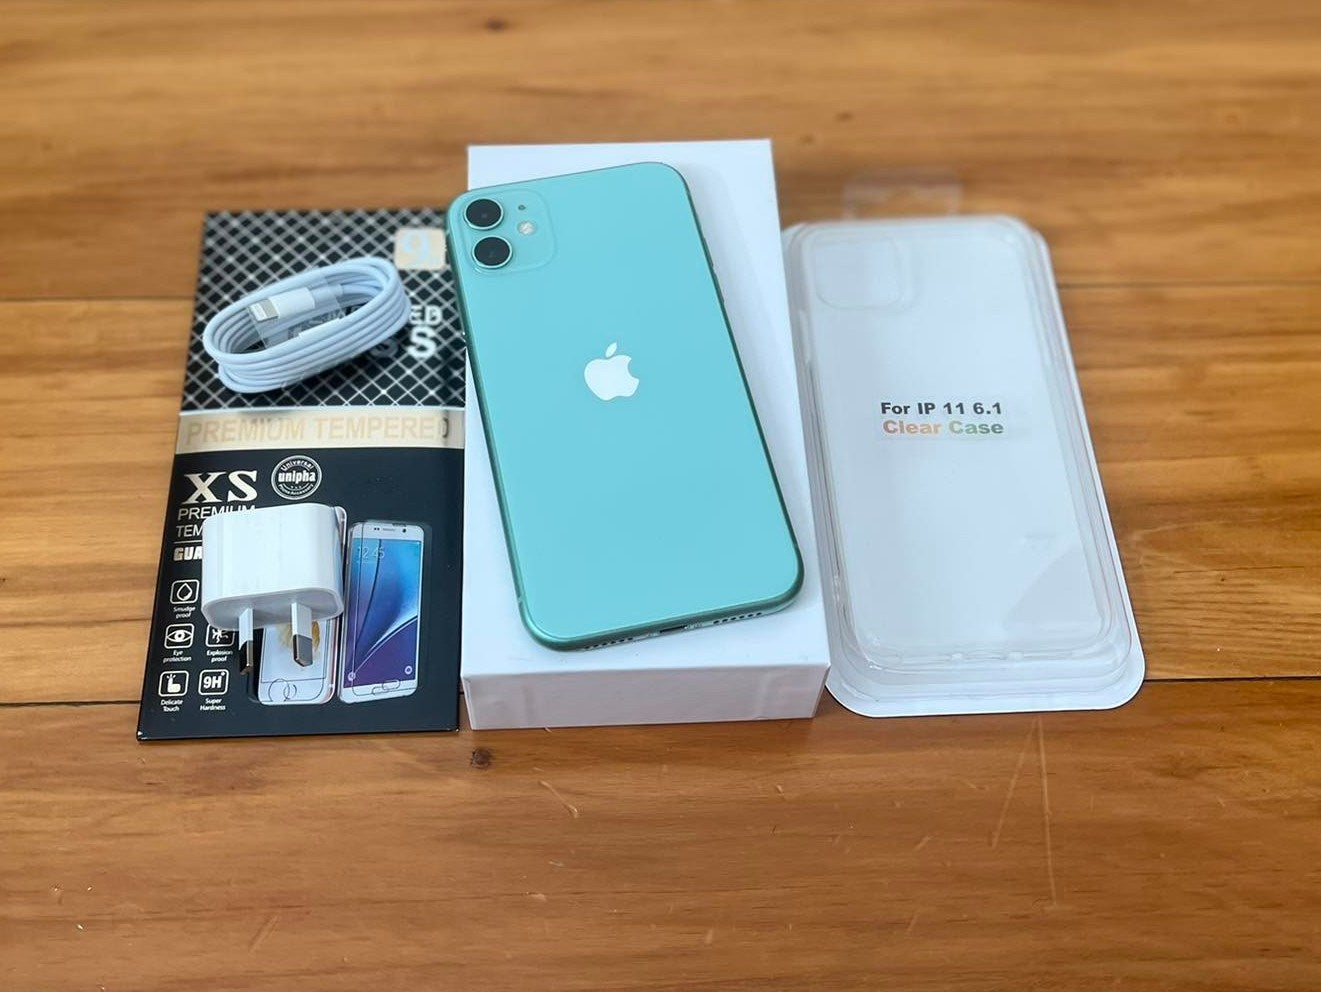 Apple iPhone 11 64GB Green - New Battery (Msg), Case, Glass Screen Protector & Shipping (As New)